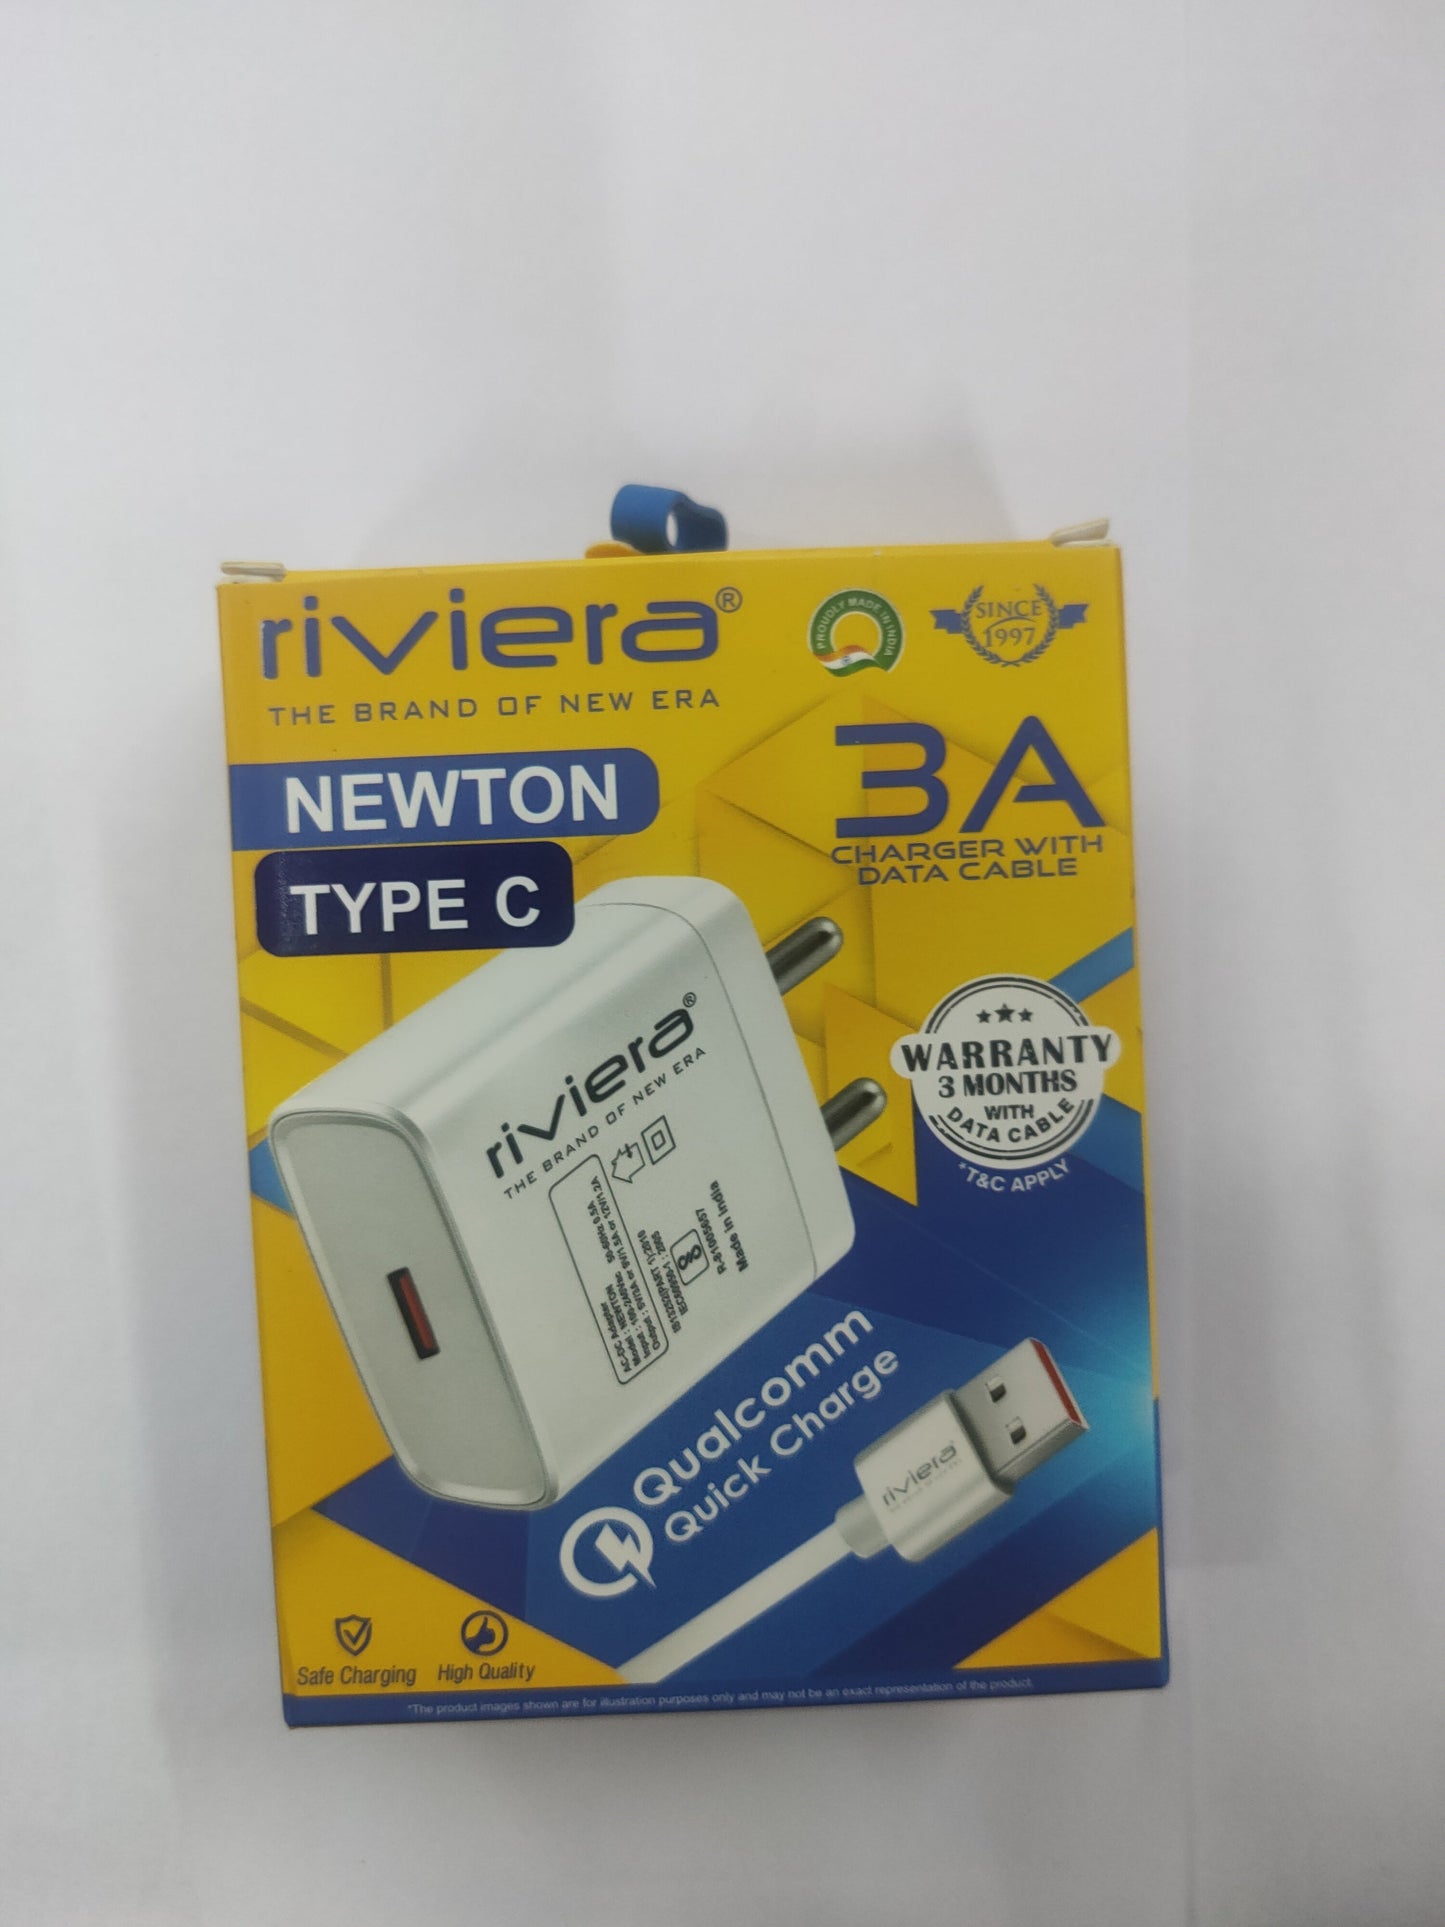 Riviera Newton TyPe C Charger